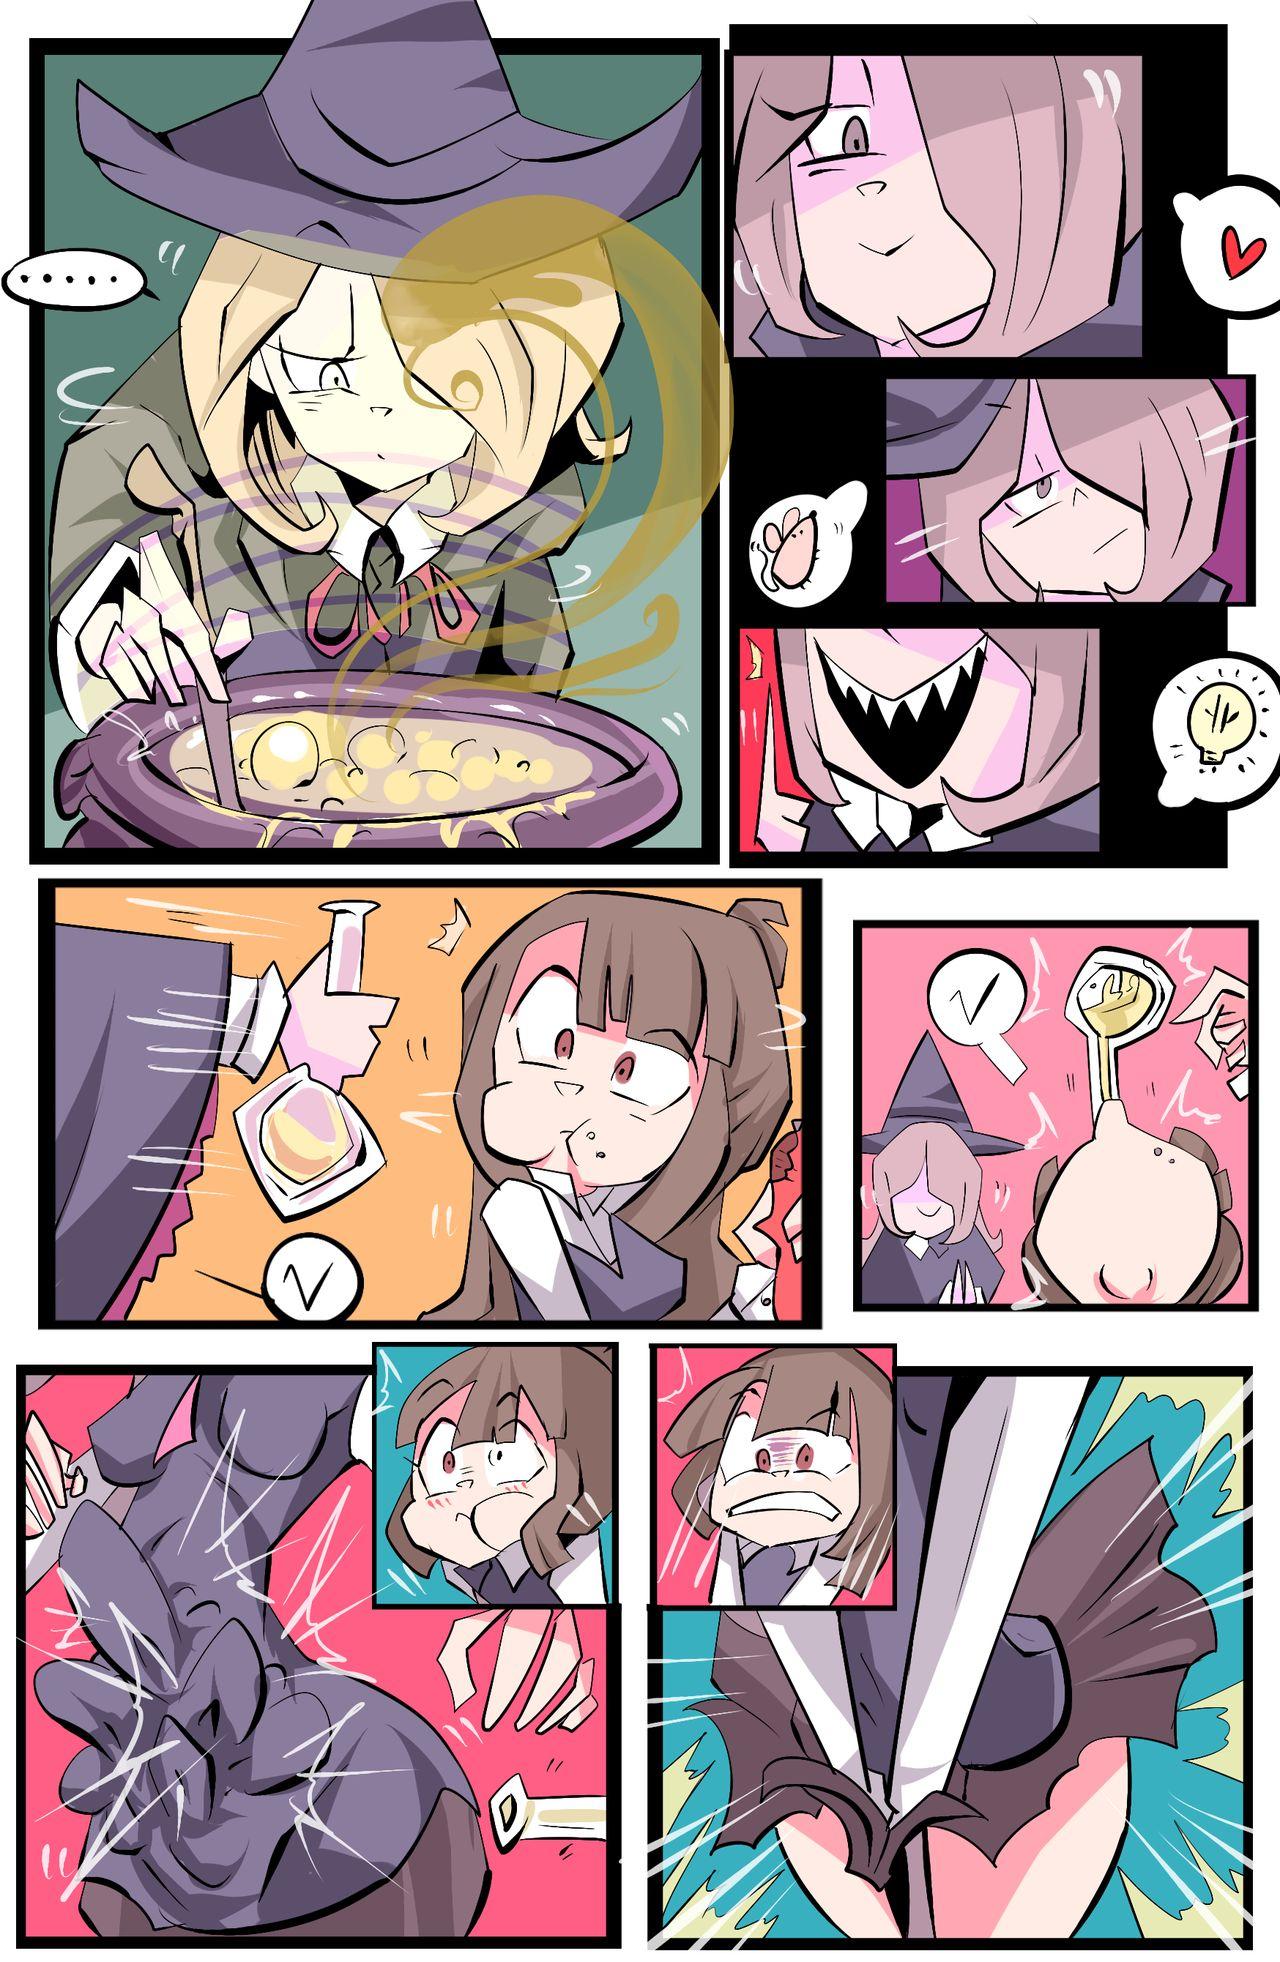 sucy's mice 2